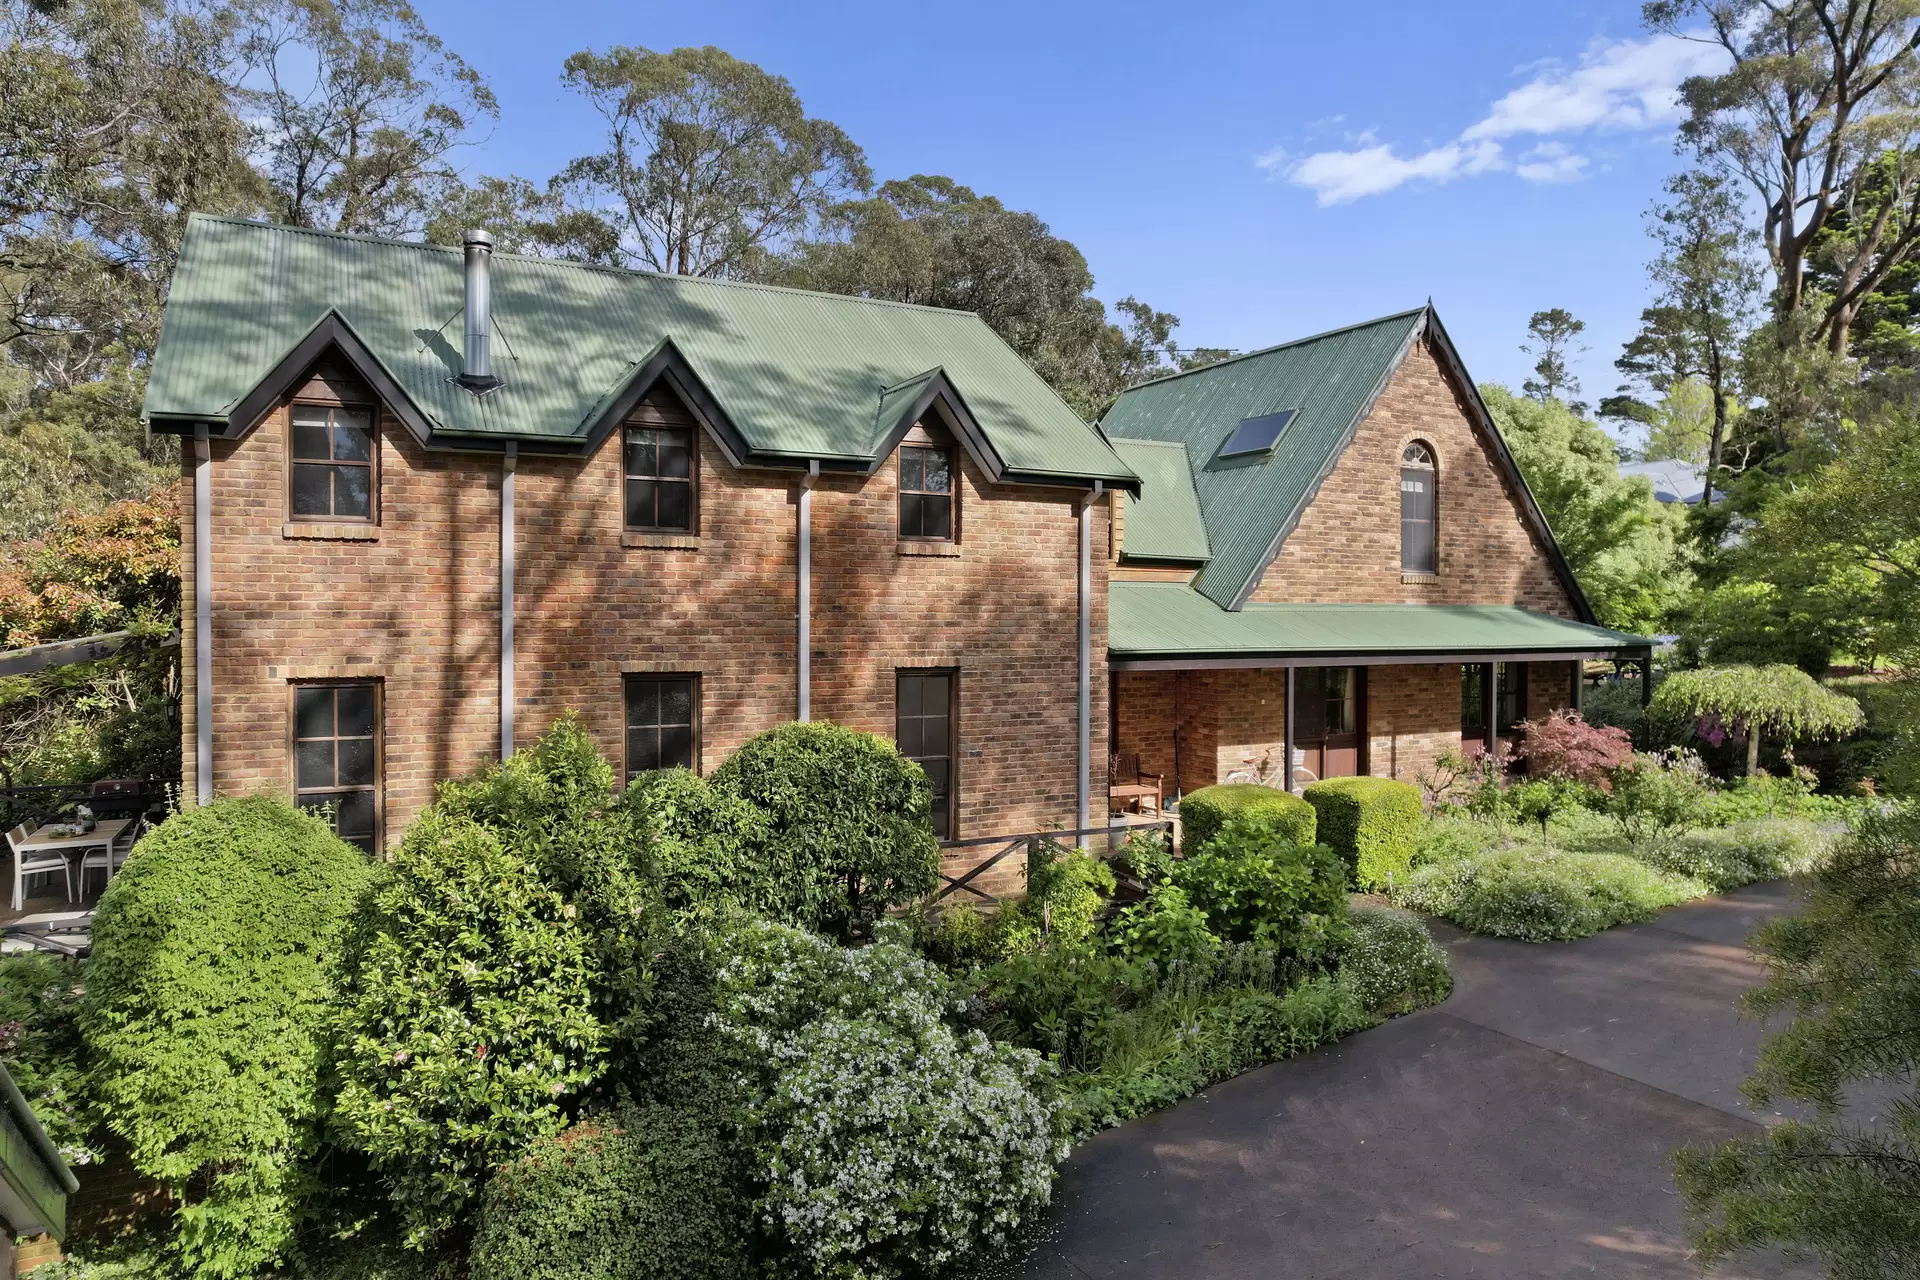 Photo #1: 3A Spencer Street, Mittagong - For Sale by Drew Lindsay Sotheby's International Realty